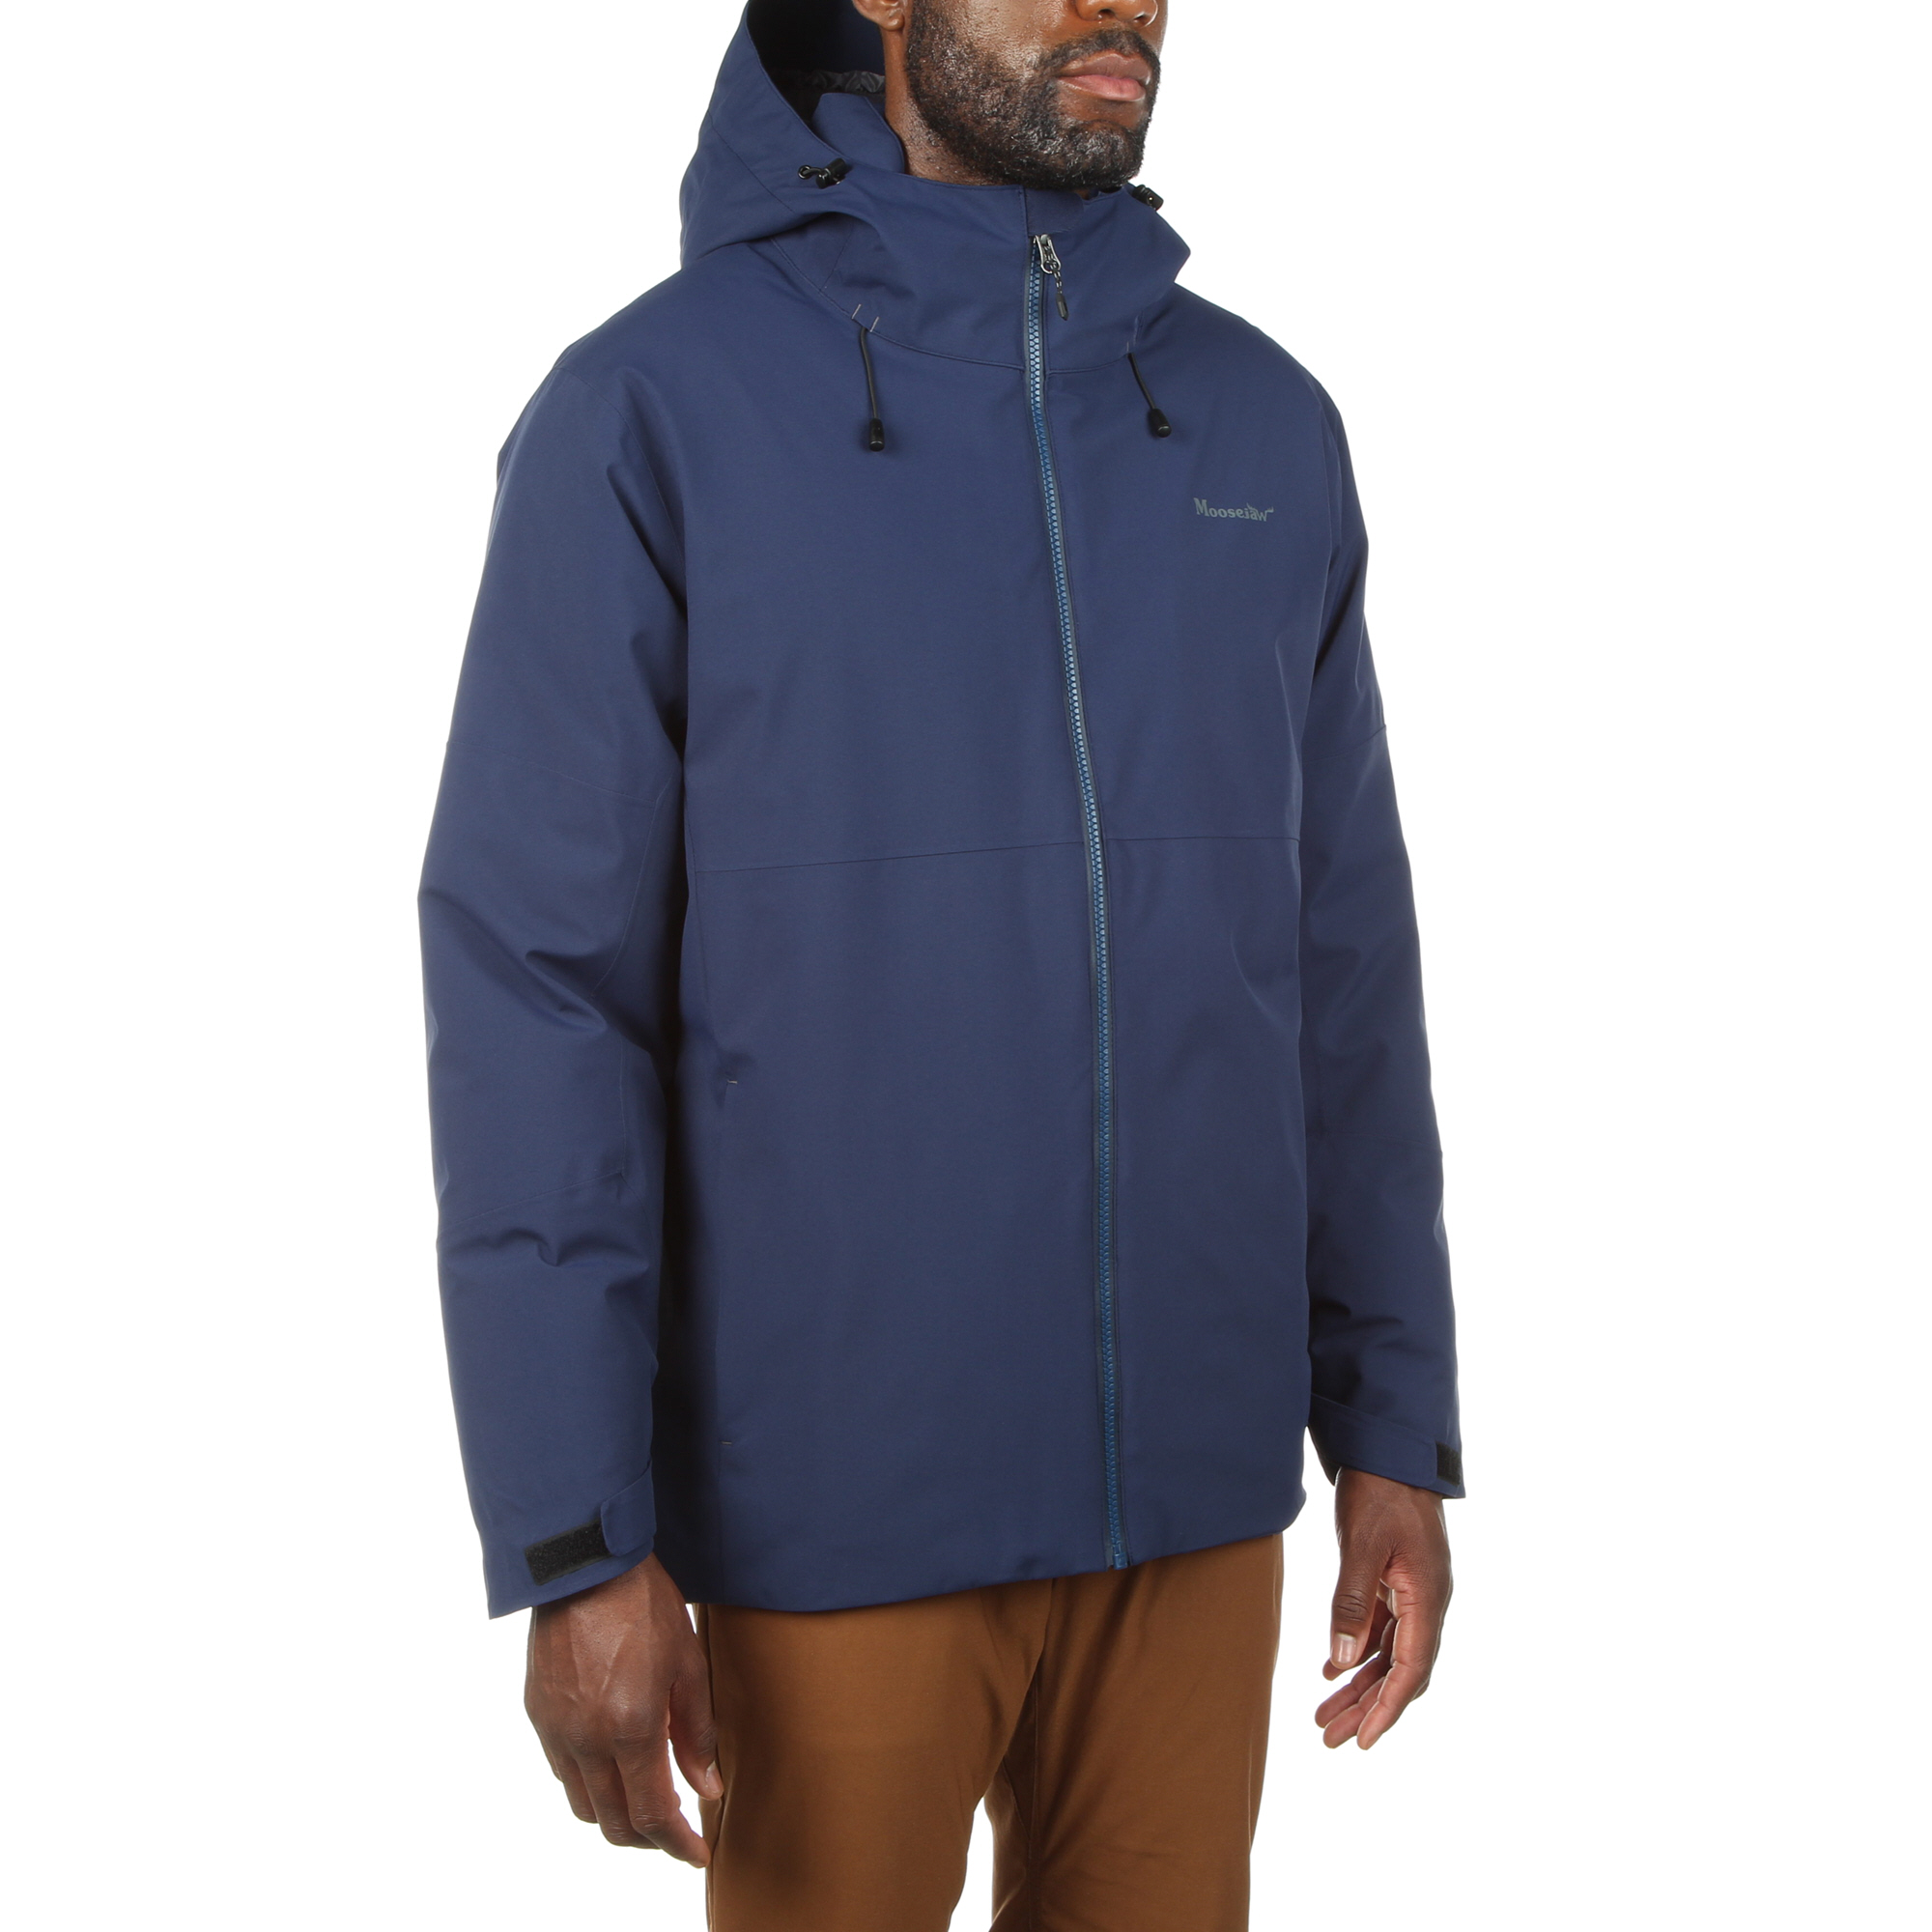 Moosejaw Men's and Big Men's Hooded Insulated Jacket, Up to Size 